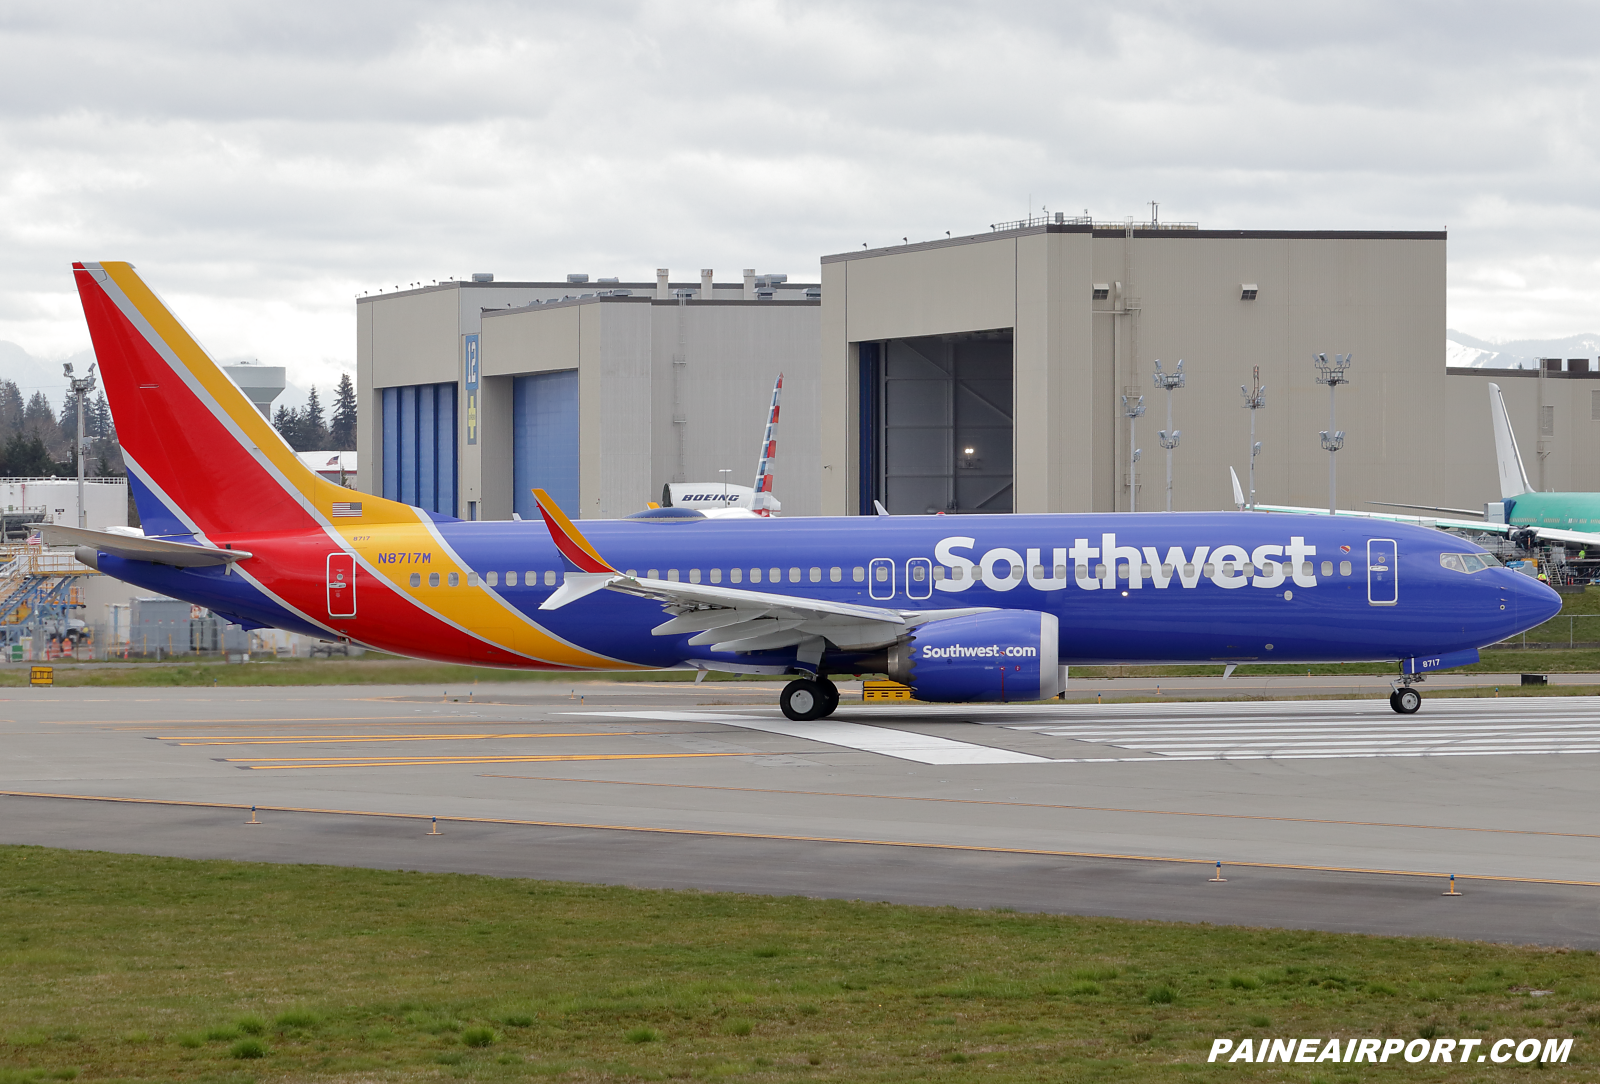 Southwest Airlines 737 N8717M at KPAE Paine Field